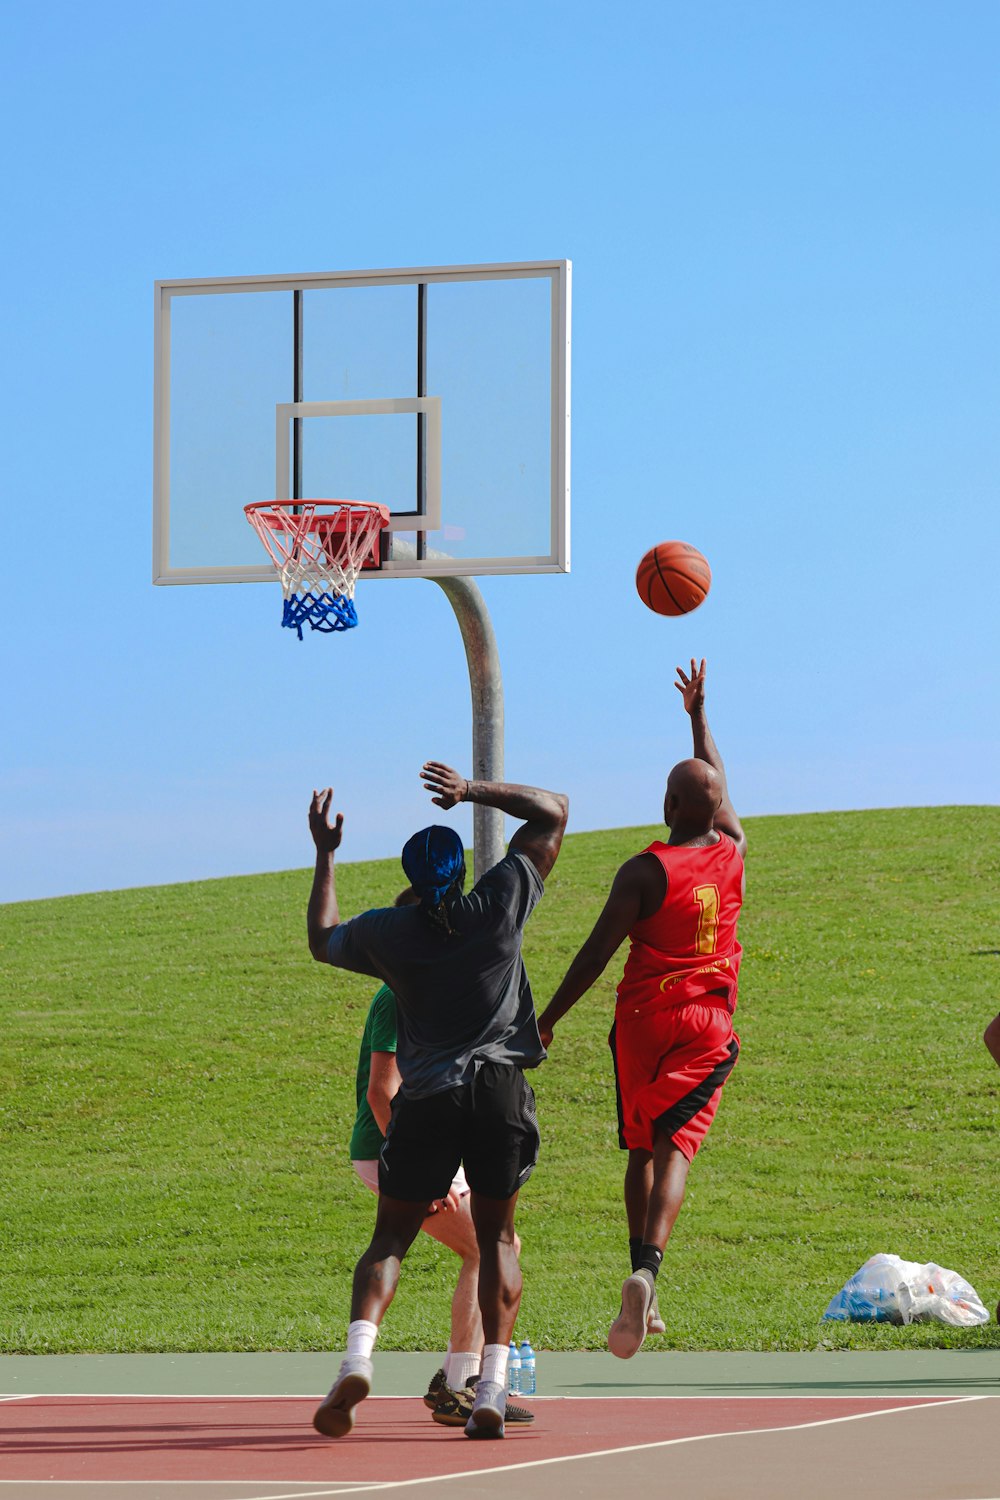 4 men playing basketball on green grass field during daytime